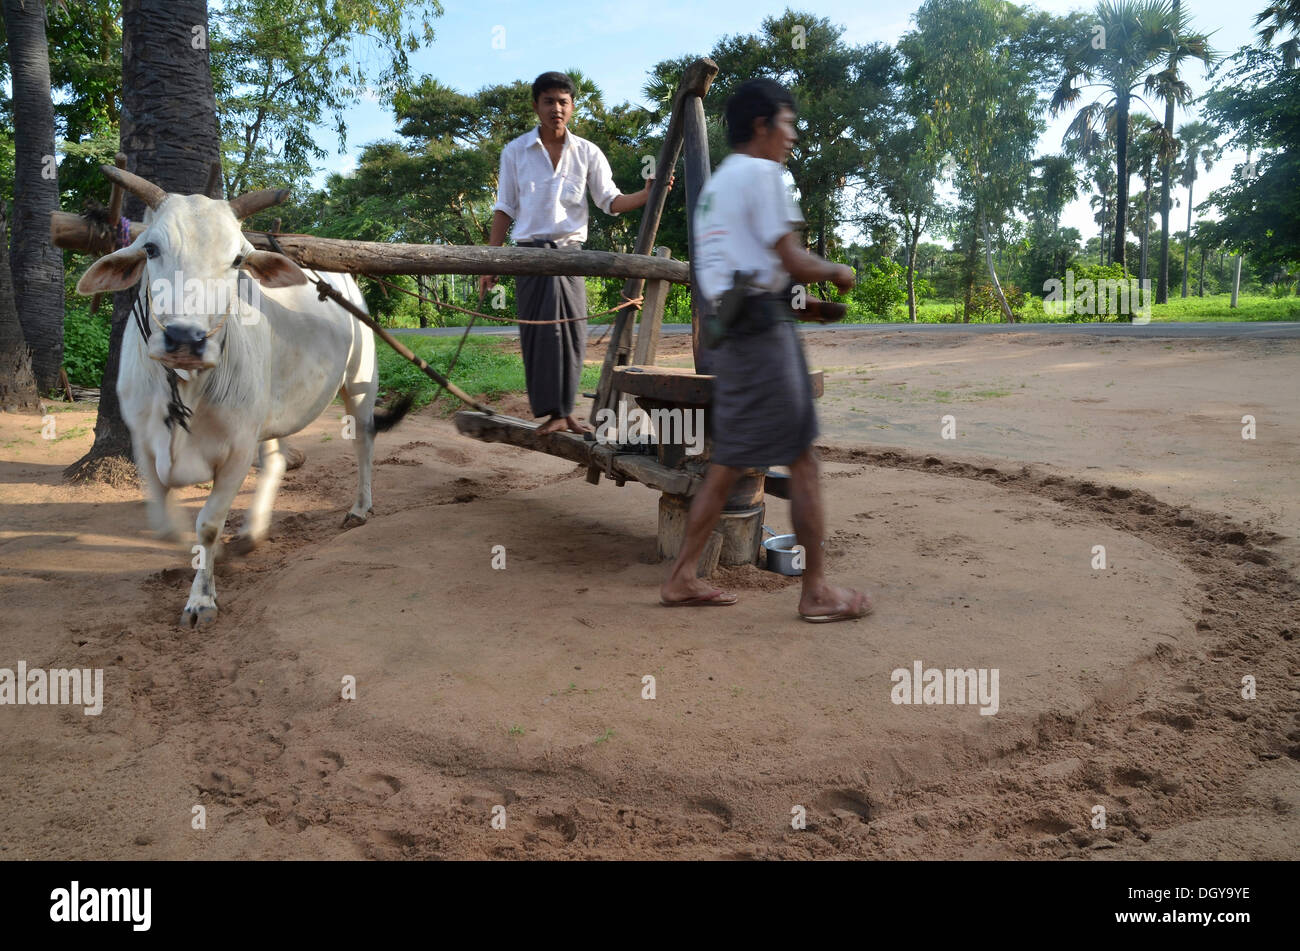 Two Burmese men in a Longyi or wrap-around skirt, and an ox which turns a simple stone mill for peanut oil production, Bagan Stock Photo